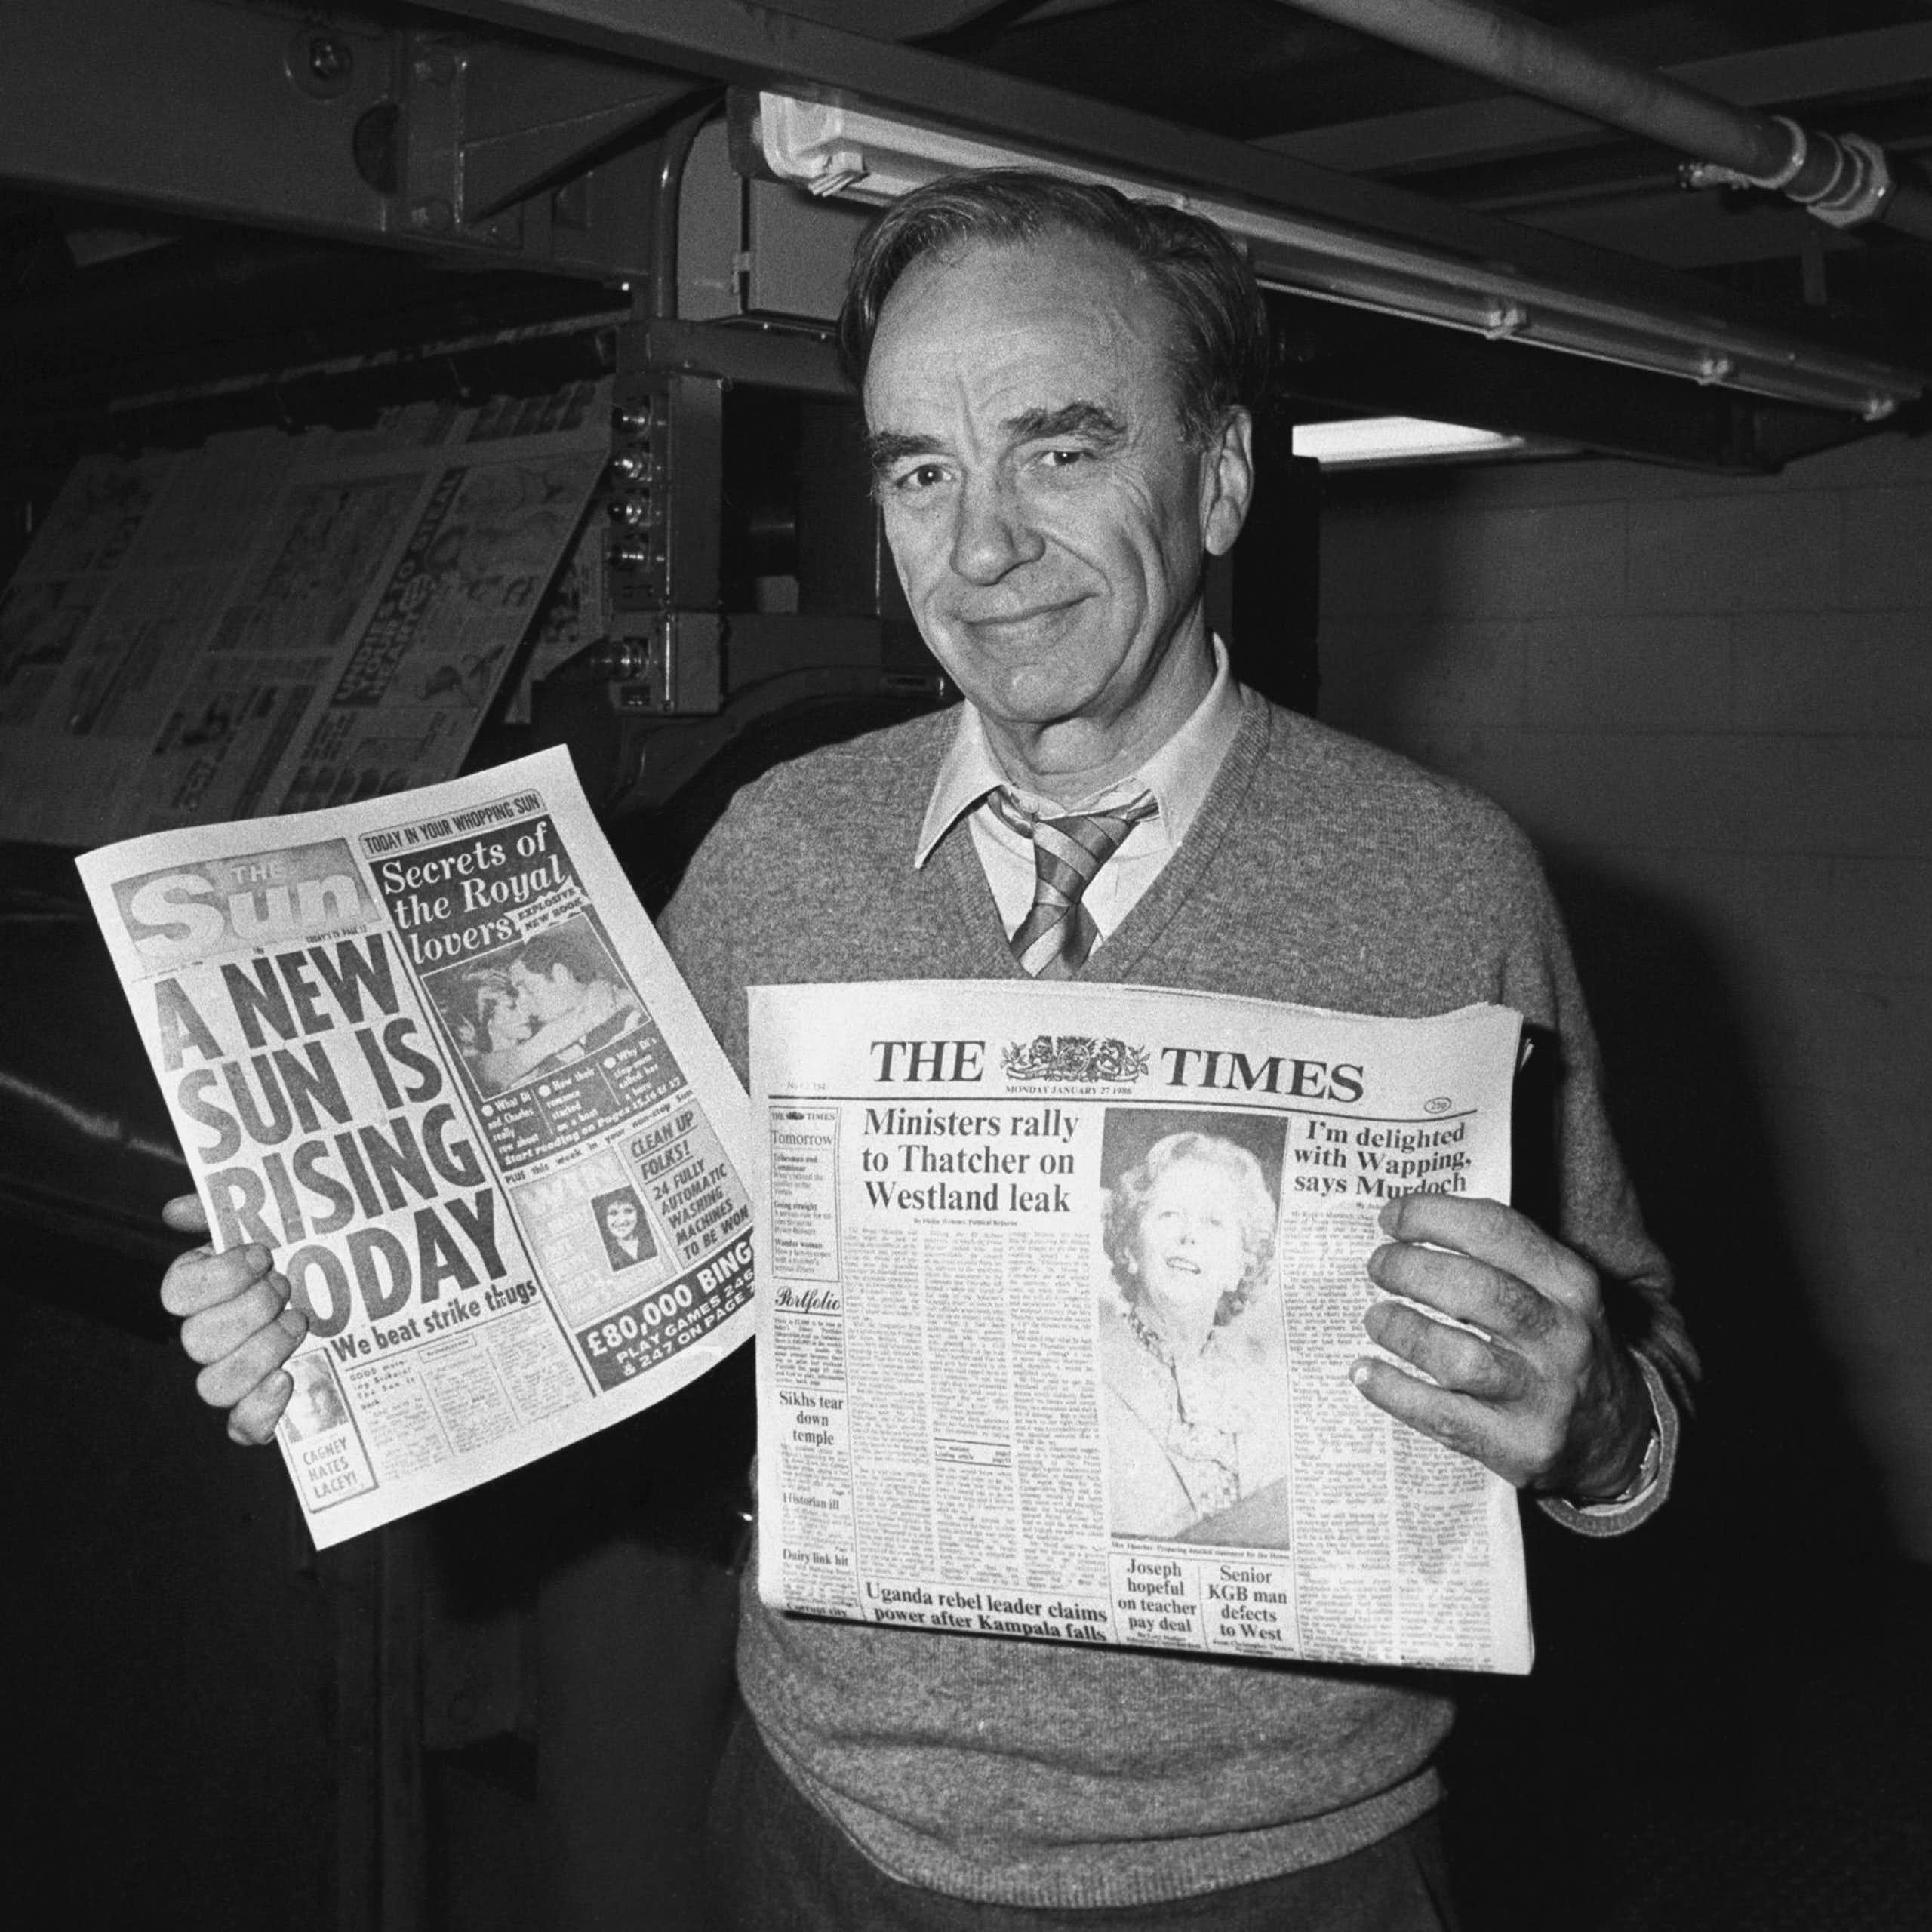 Rupert Murdoch holding newspapers at a print site in 1986.